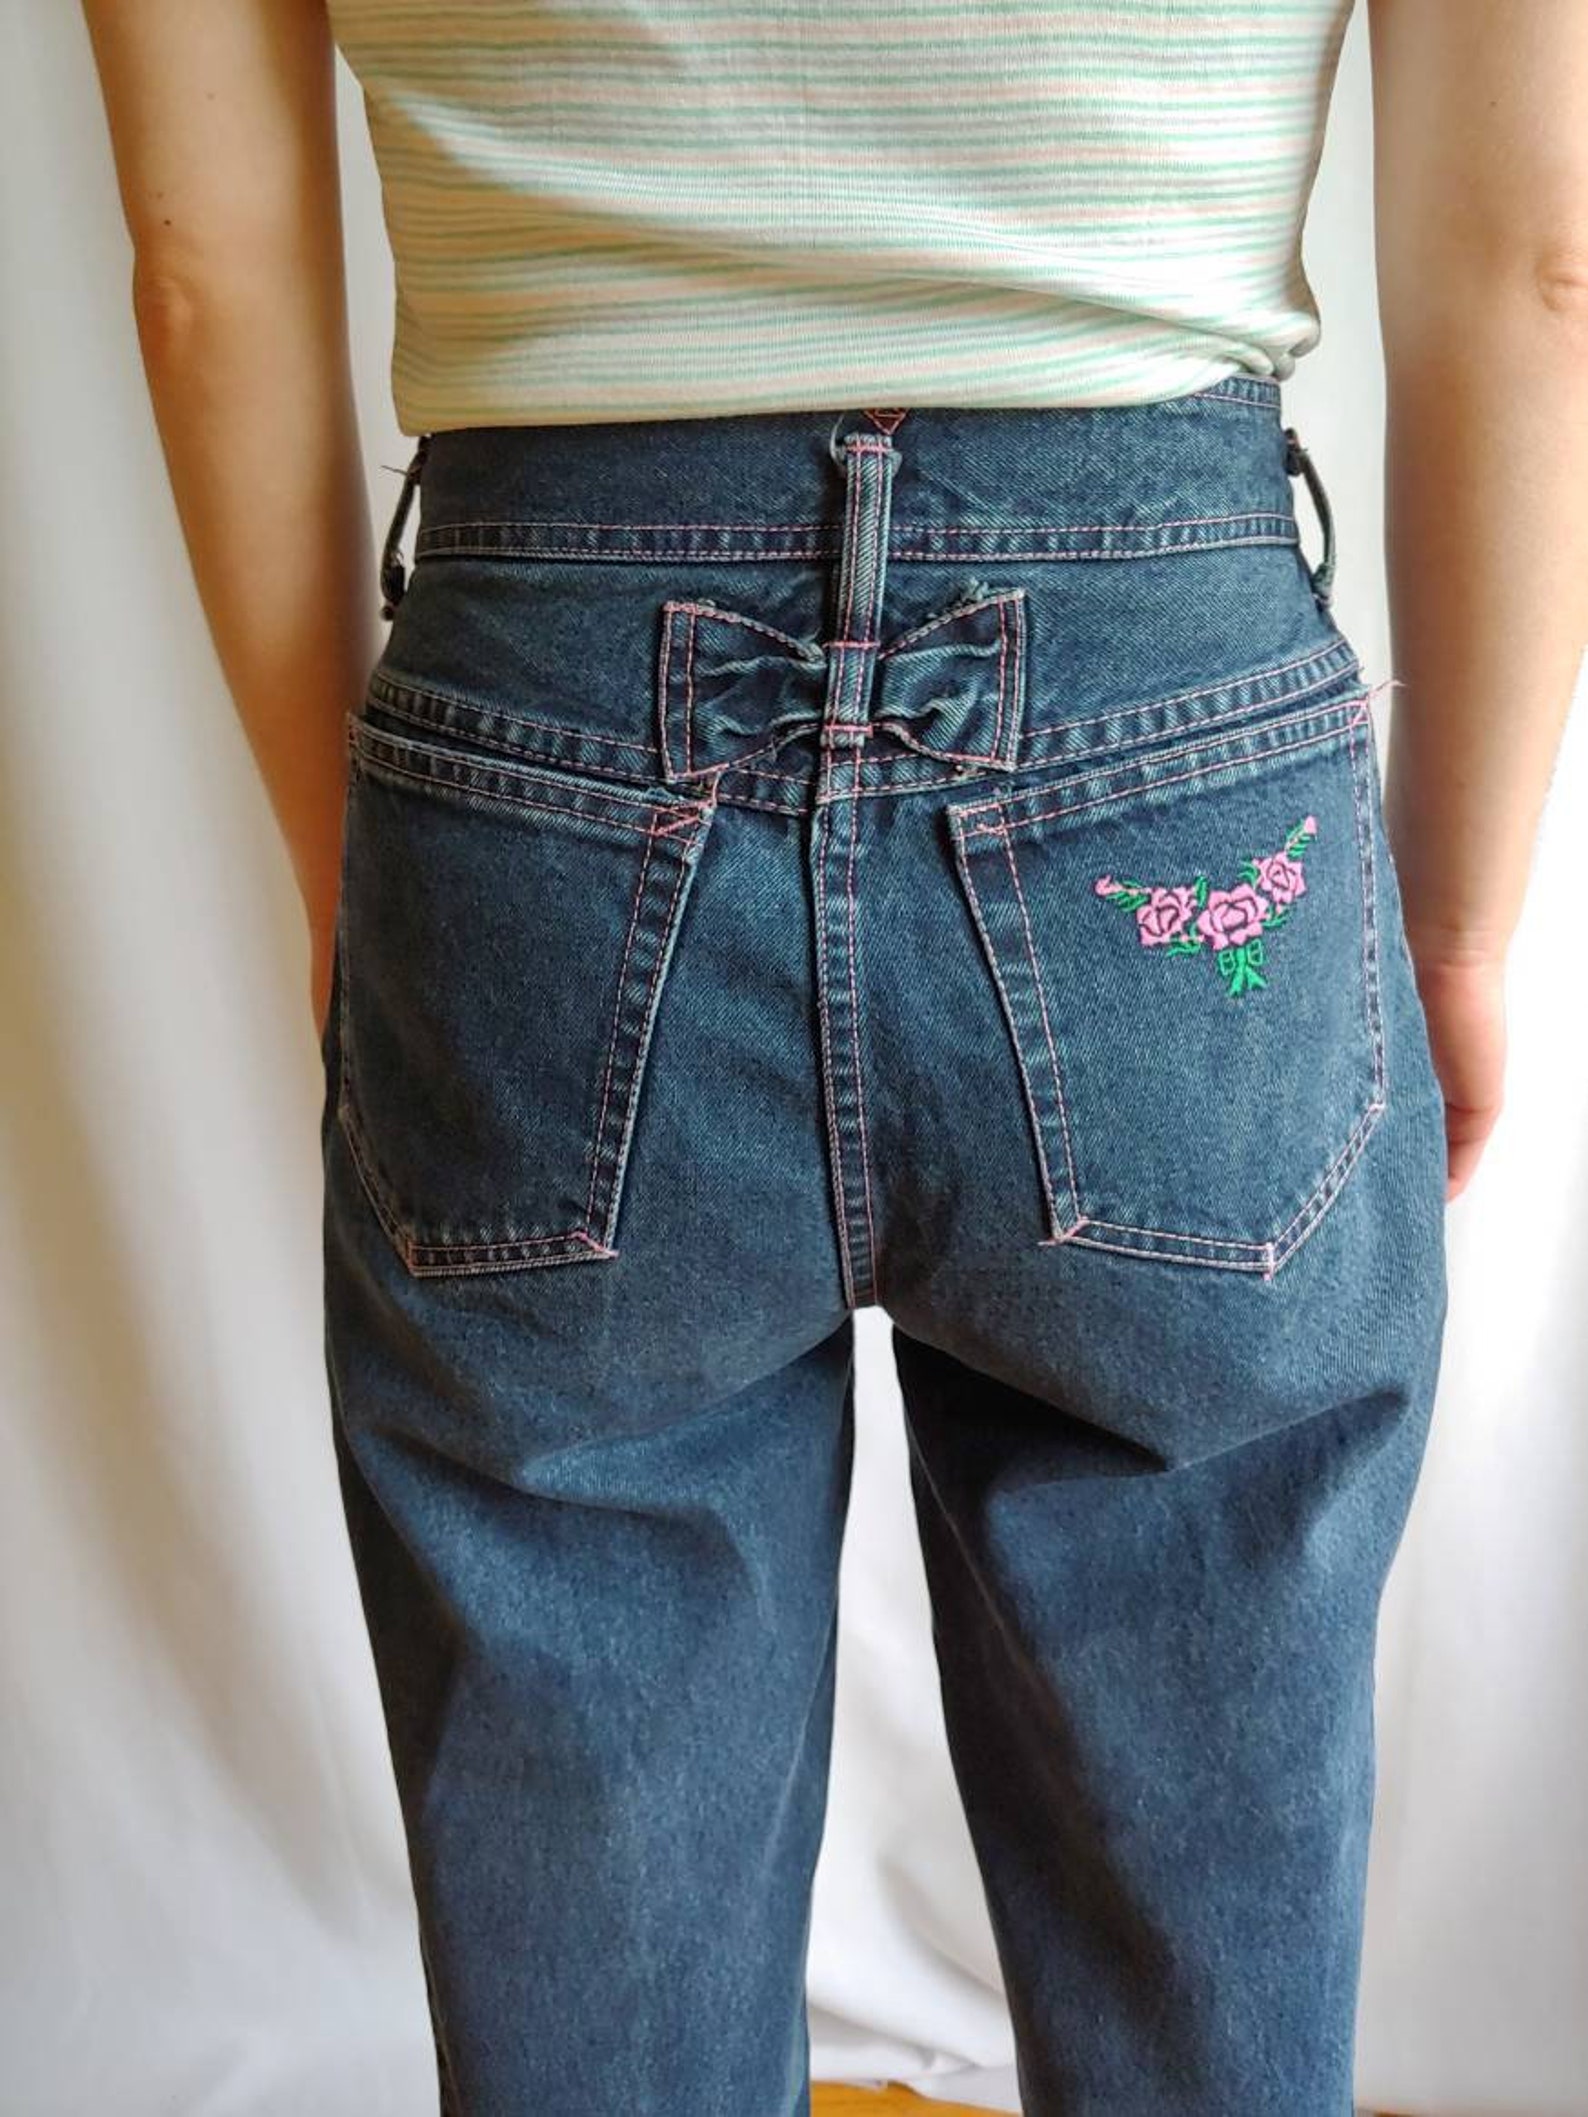 80s High Waisted Jeans embroidered waist zipper ankles Petite | Etsy